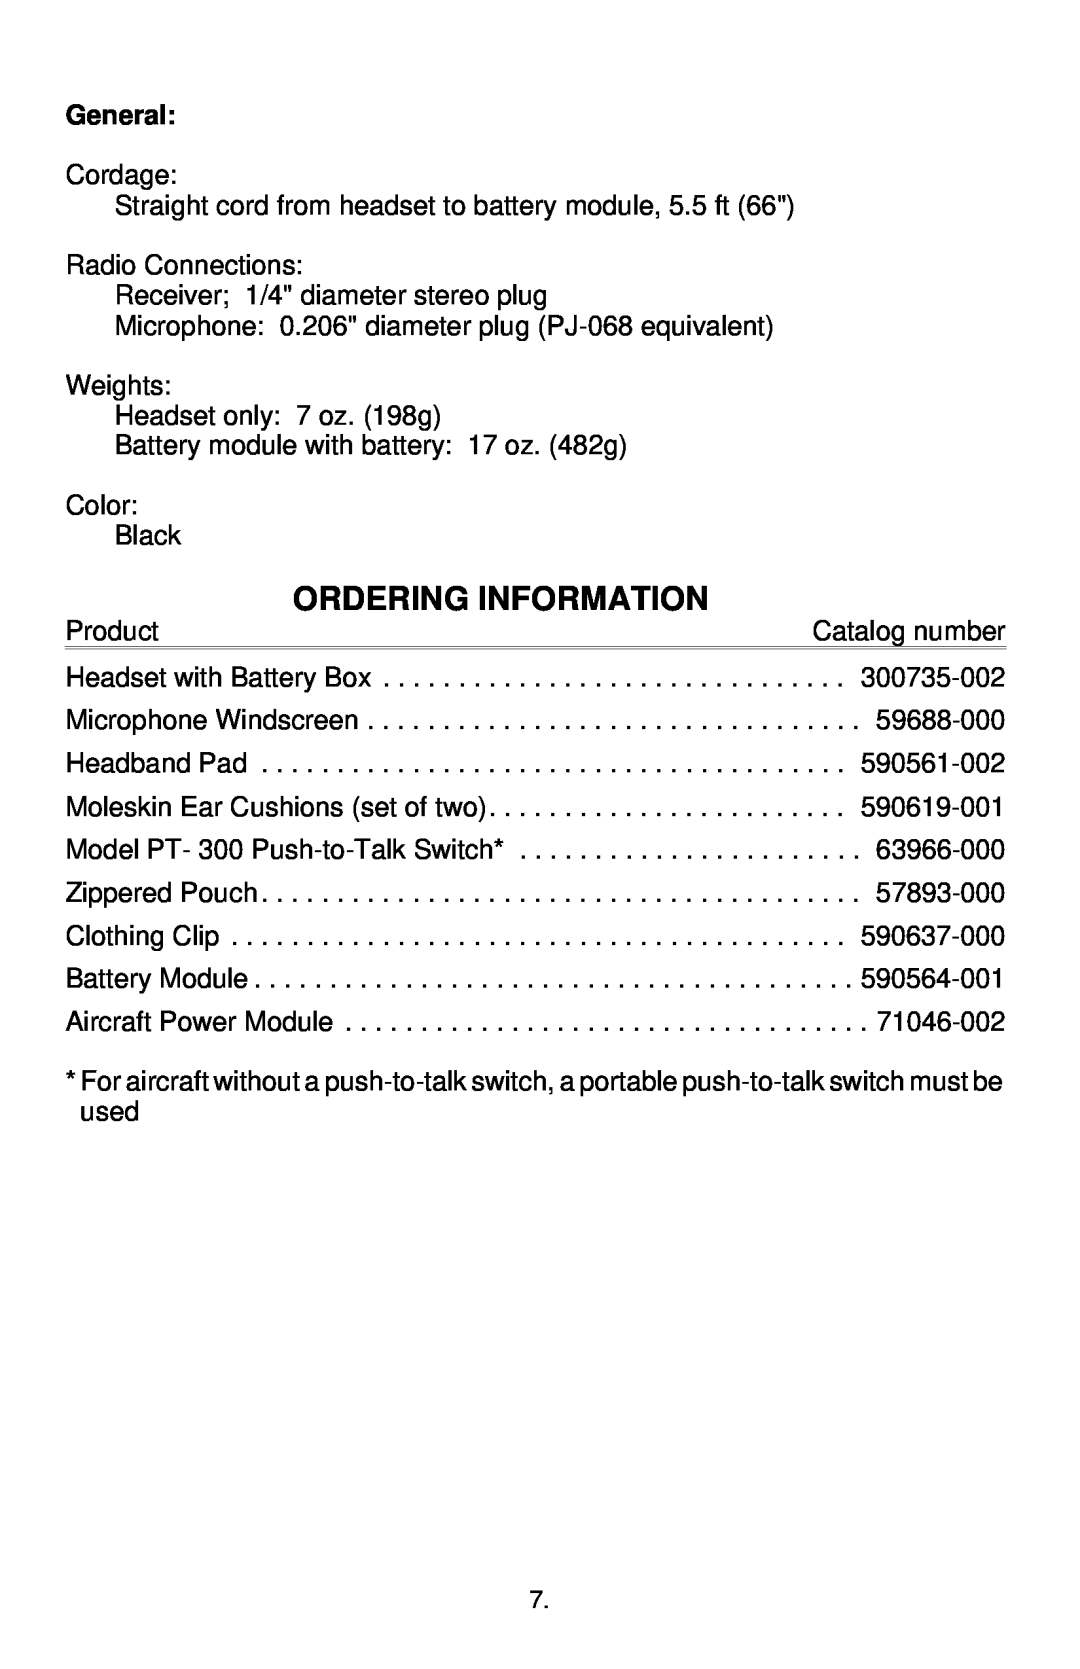 Telex ANR TM 500 operating instructions Ordering Information, General 